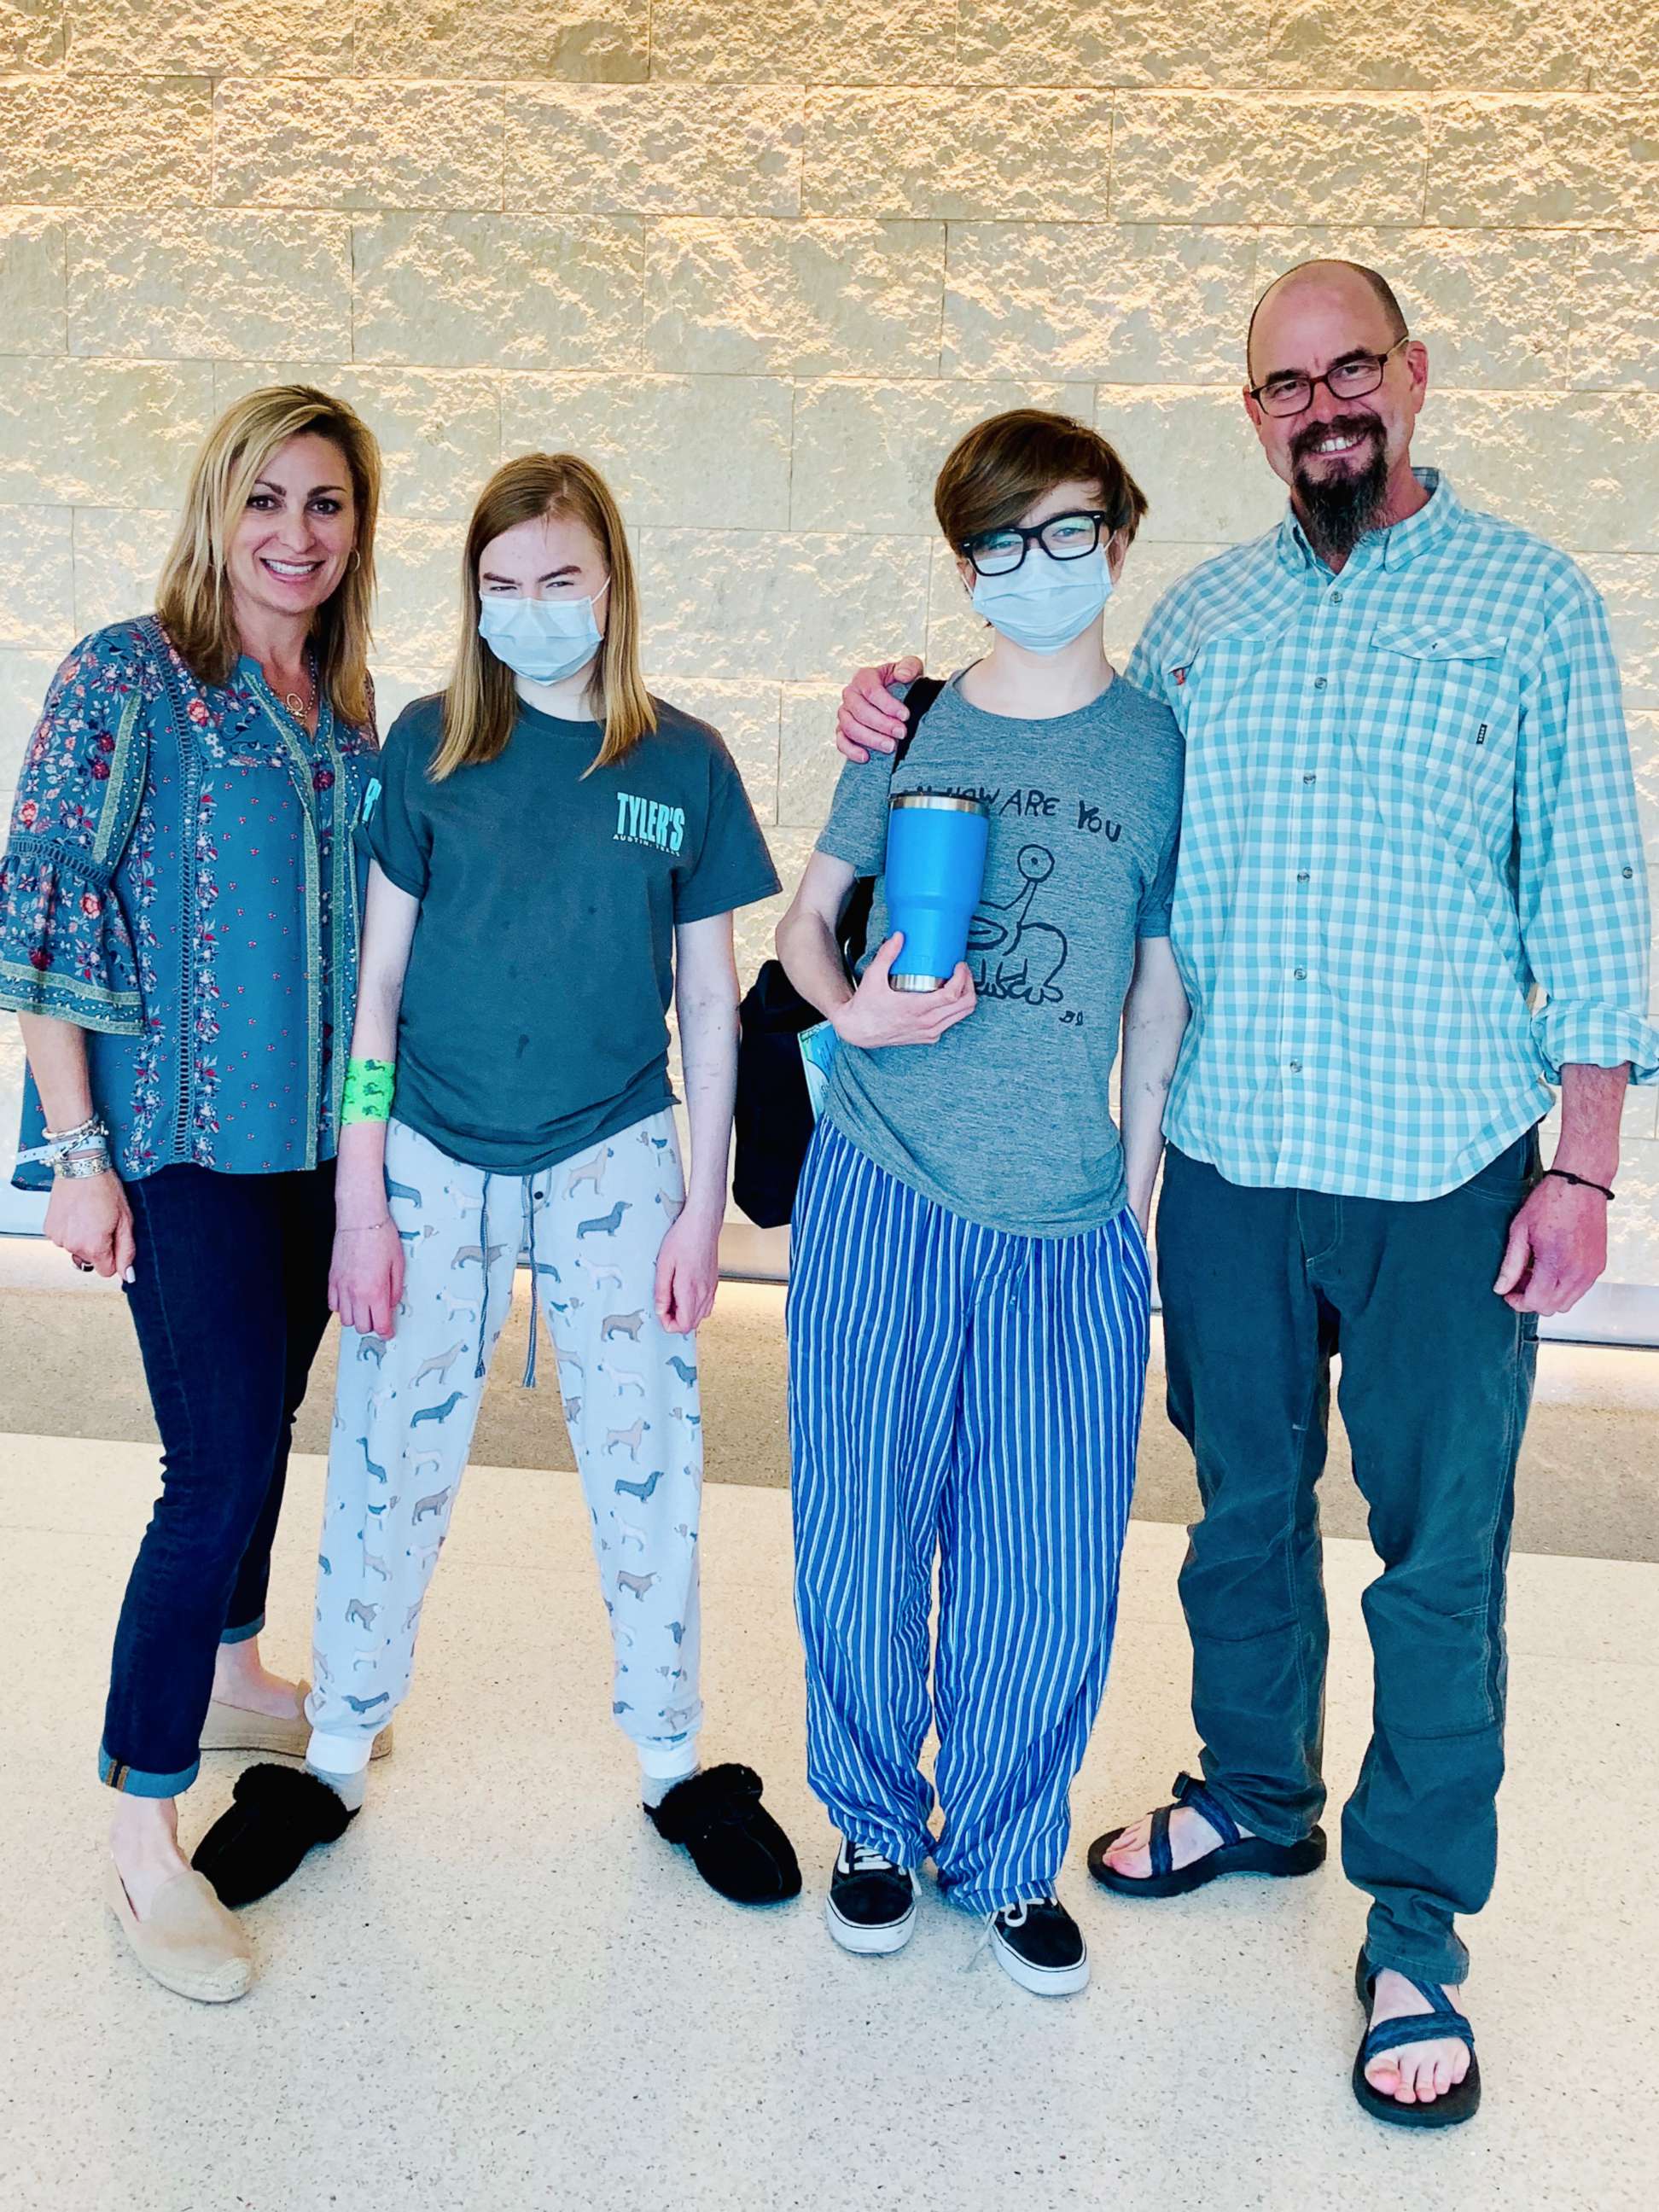 PHOTO: John Ben Shepperd, 18 and Ava Shepperd, 14, underwent kidney transplant surgeries at the same time at University Hospital in San Antonio, Texas, on May 3. 